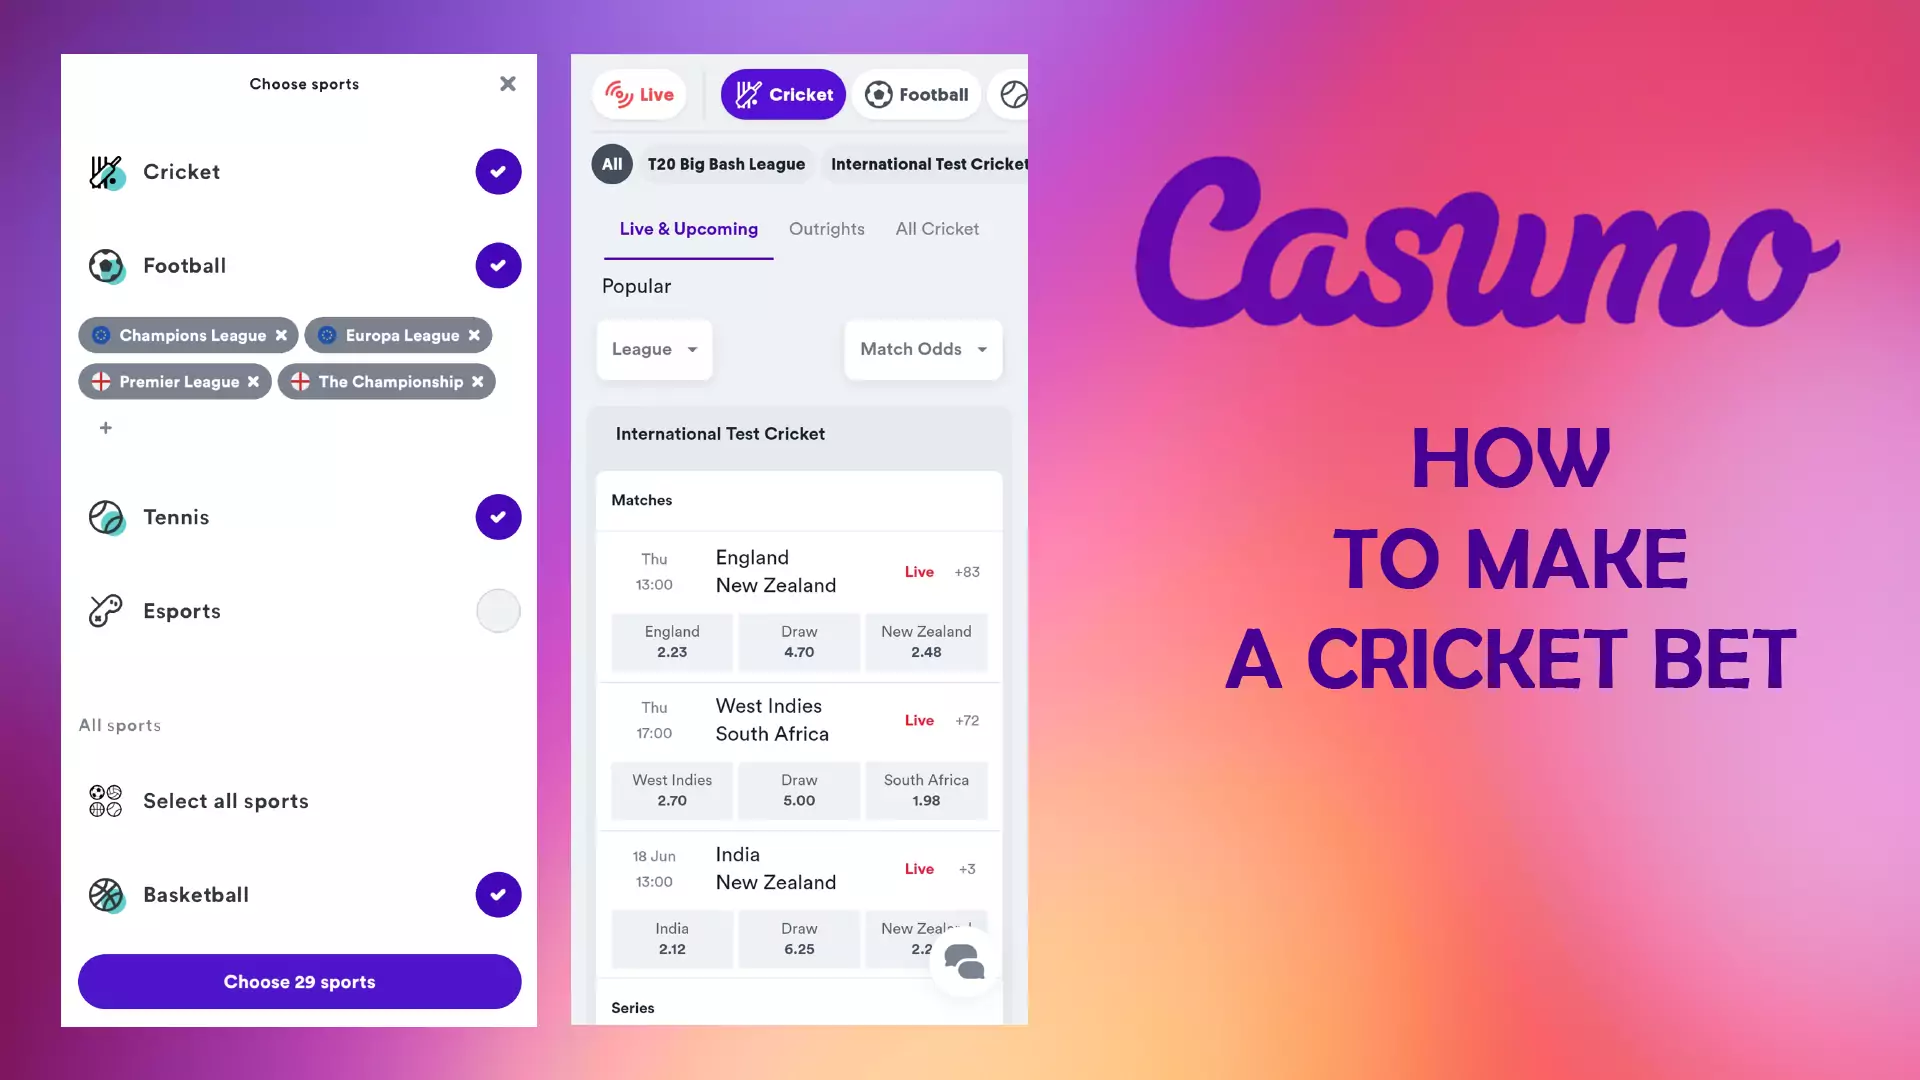 In the Casumo app, cricket betting is available for fans as well.